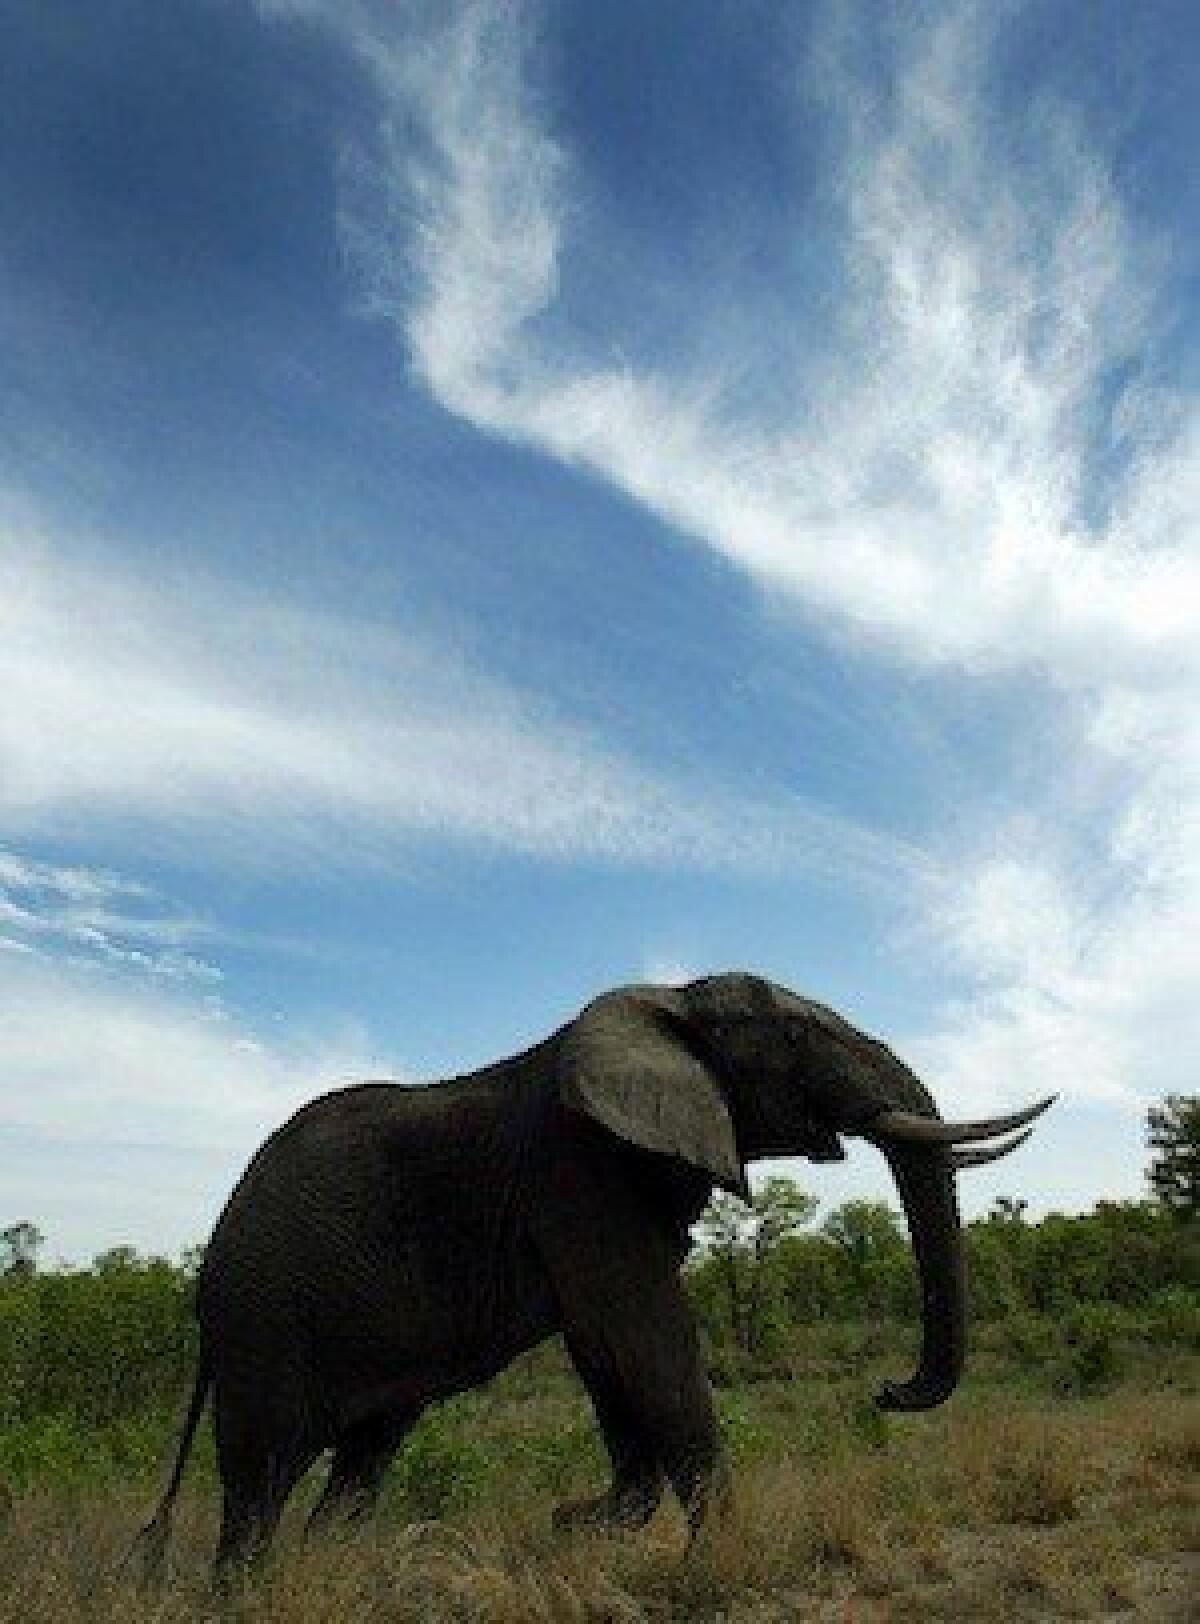 An elephant in Kruger National Park in South Africa. Friendly Planet's Cyber Monday sale includes discounts on a trip to the park and the country.